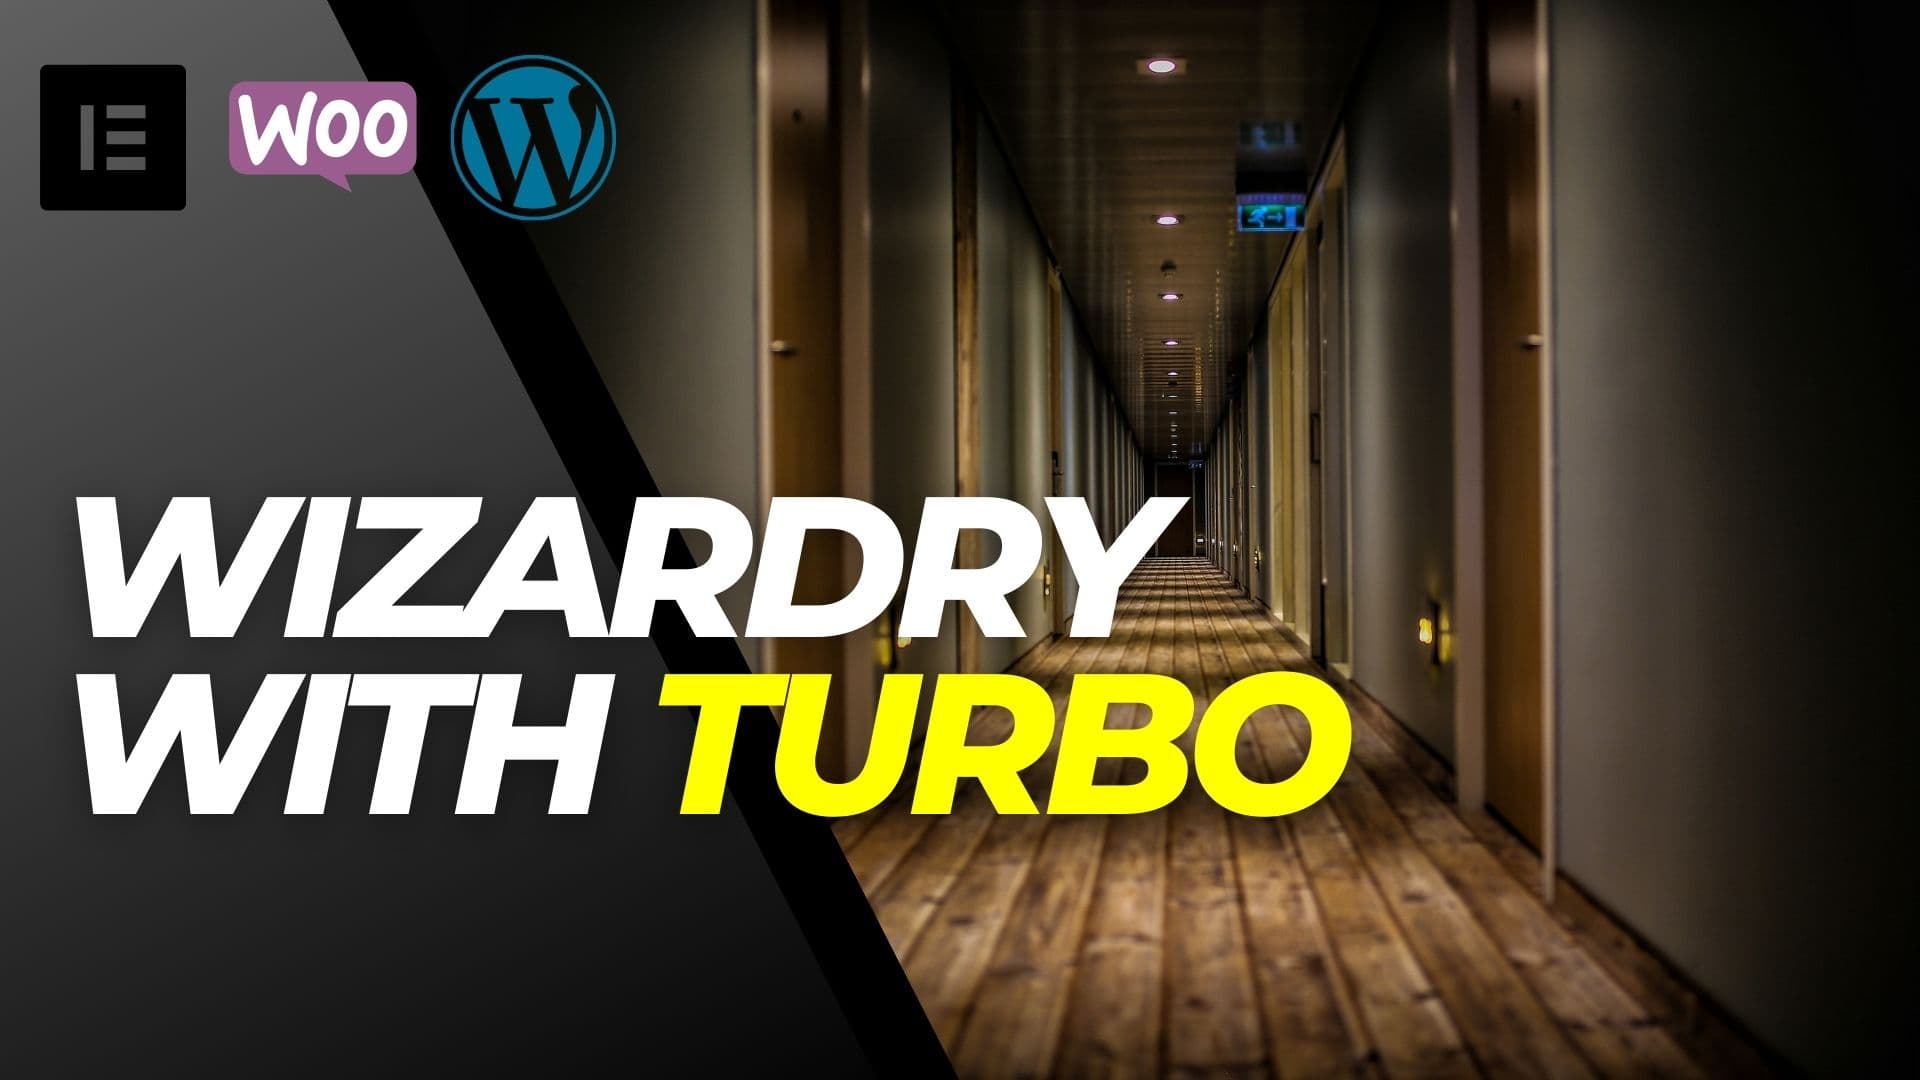 Creating a Hotel and Apartment Site with Turbo - WooCommerce Bookings Theme!